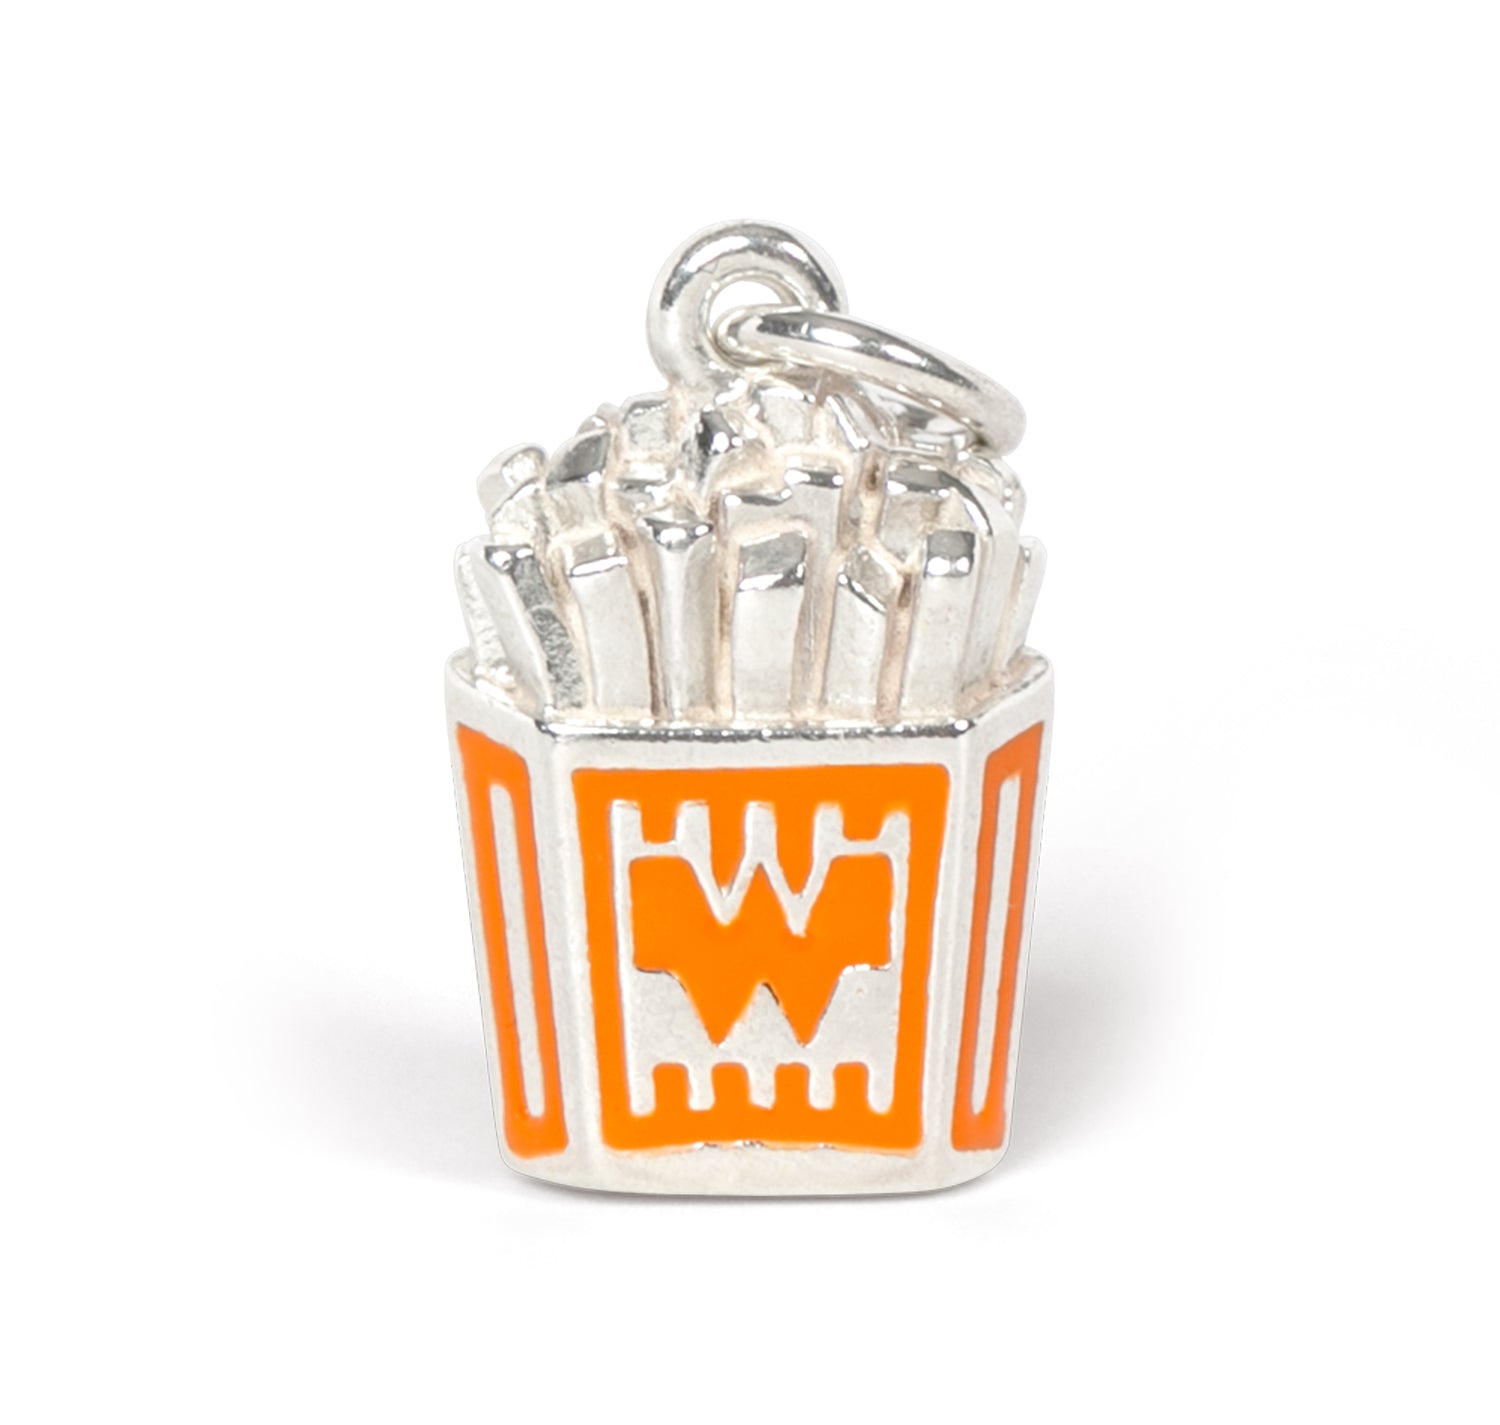 James Avery Enamel Whataburger Spicy Ketchup Charm - Sterling Multi